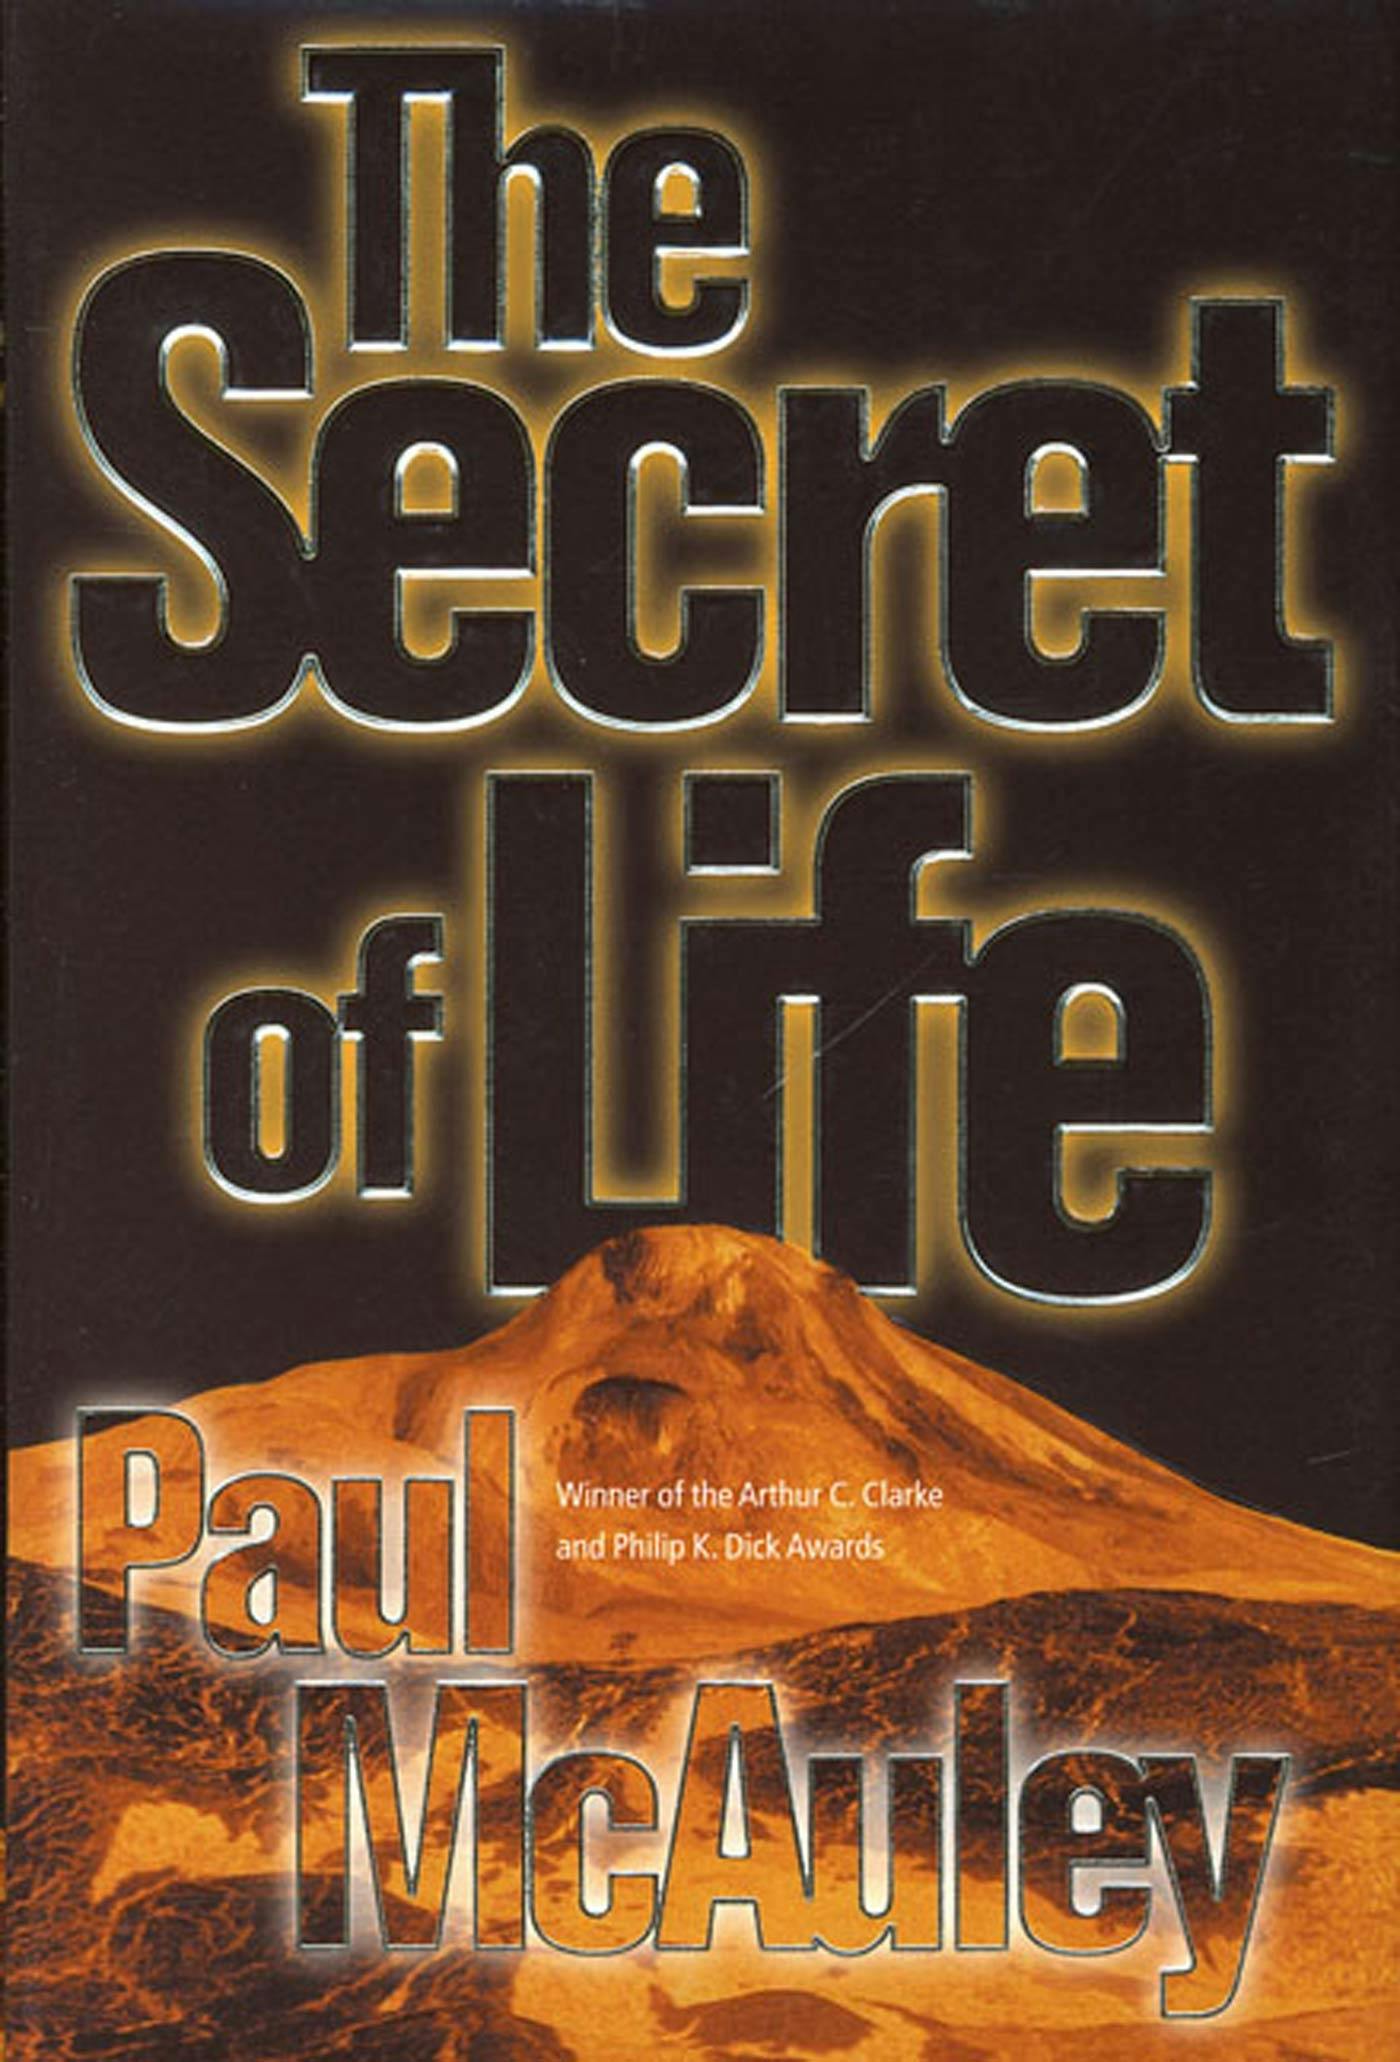 Cover for the book titled as: The Secret of Life